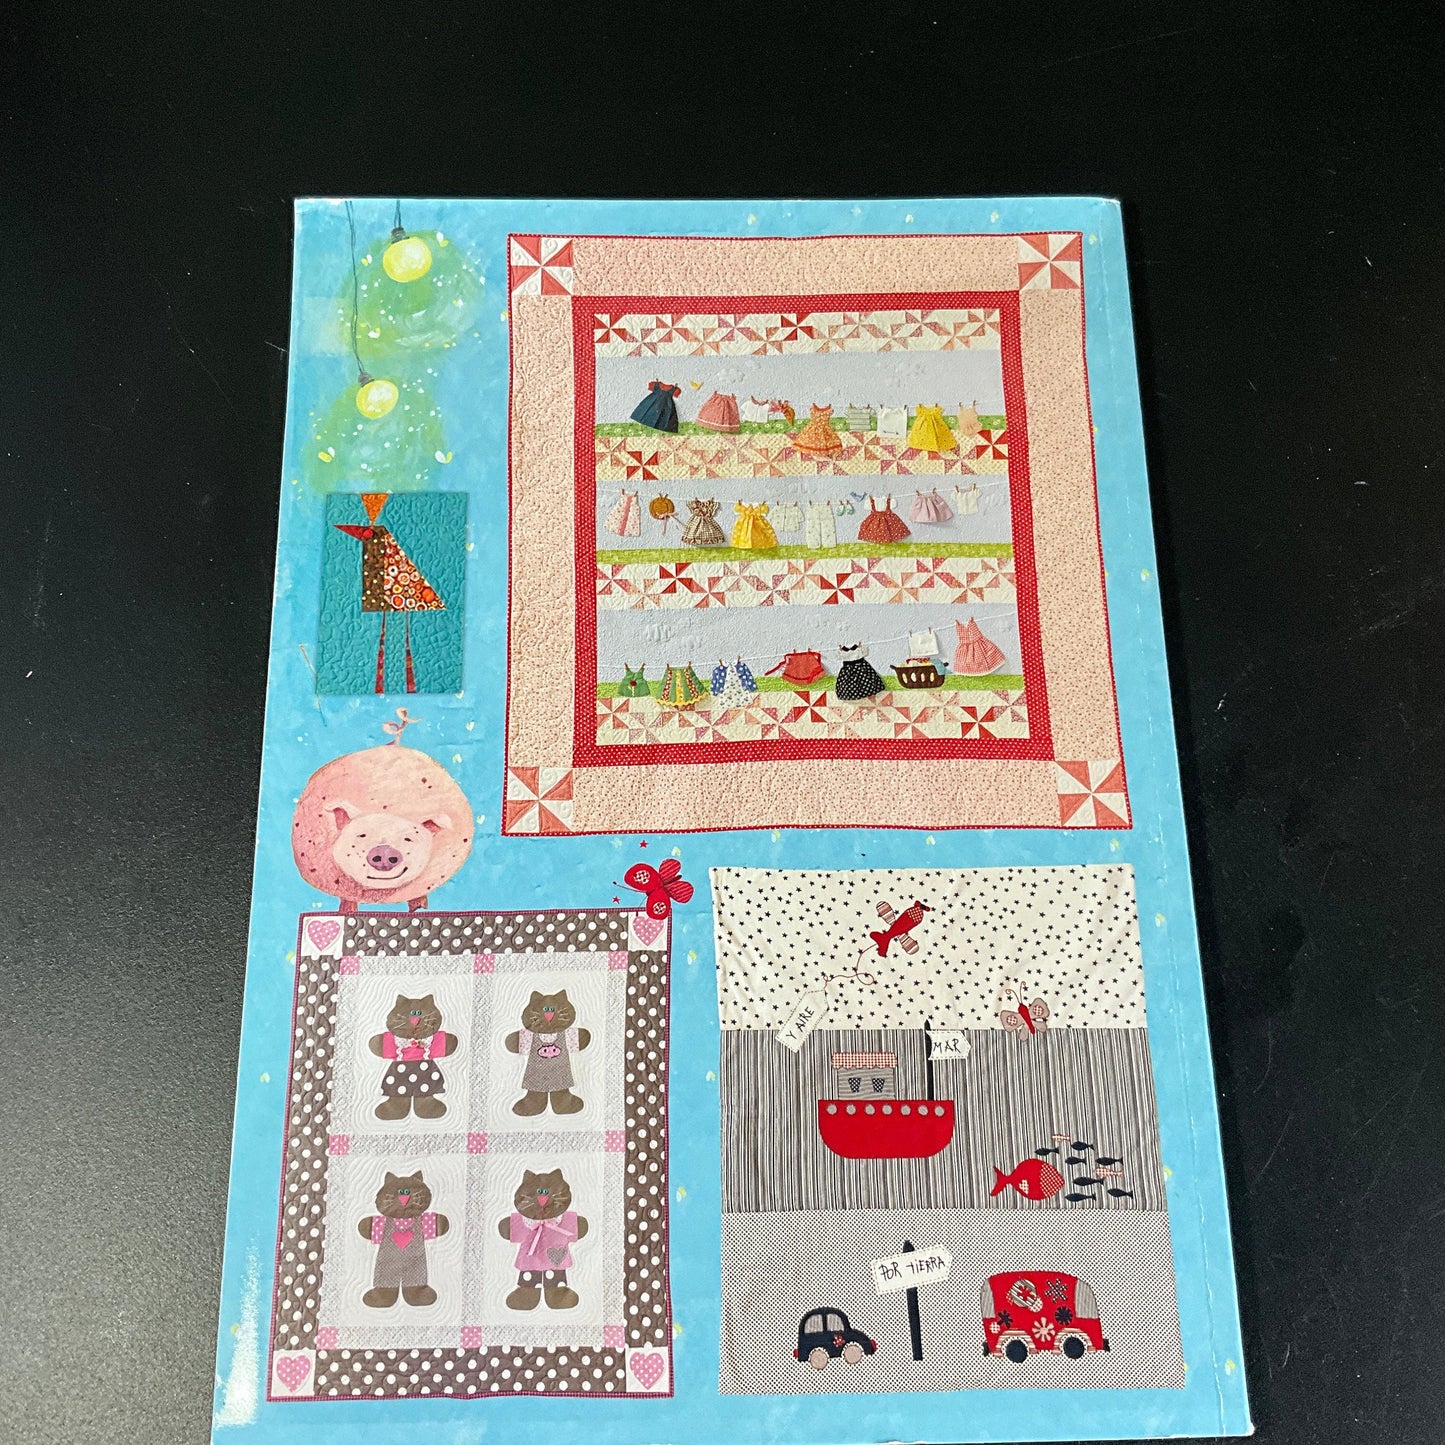 Patchwork Quilt mania Special Children 2013 19 projects for kids of all ages! quilt pattern book